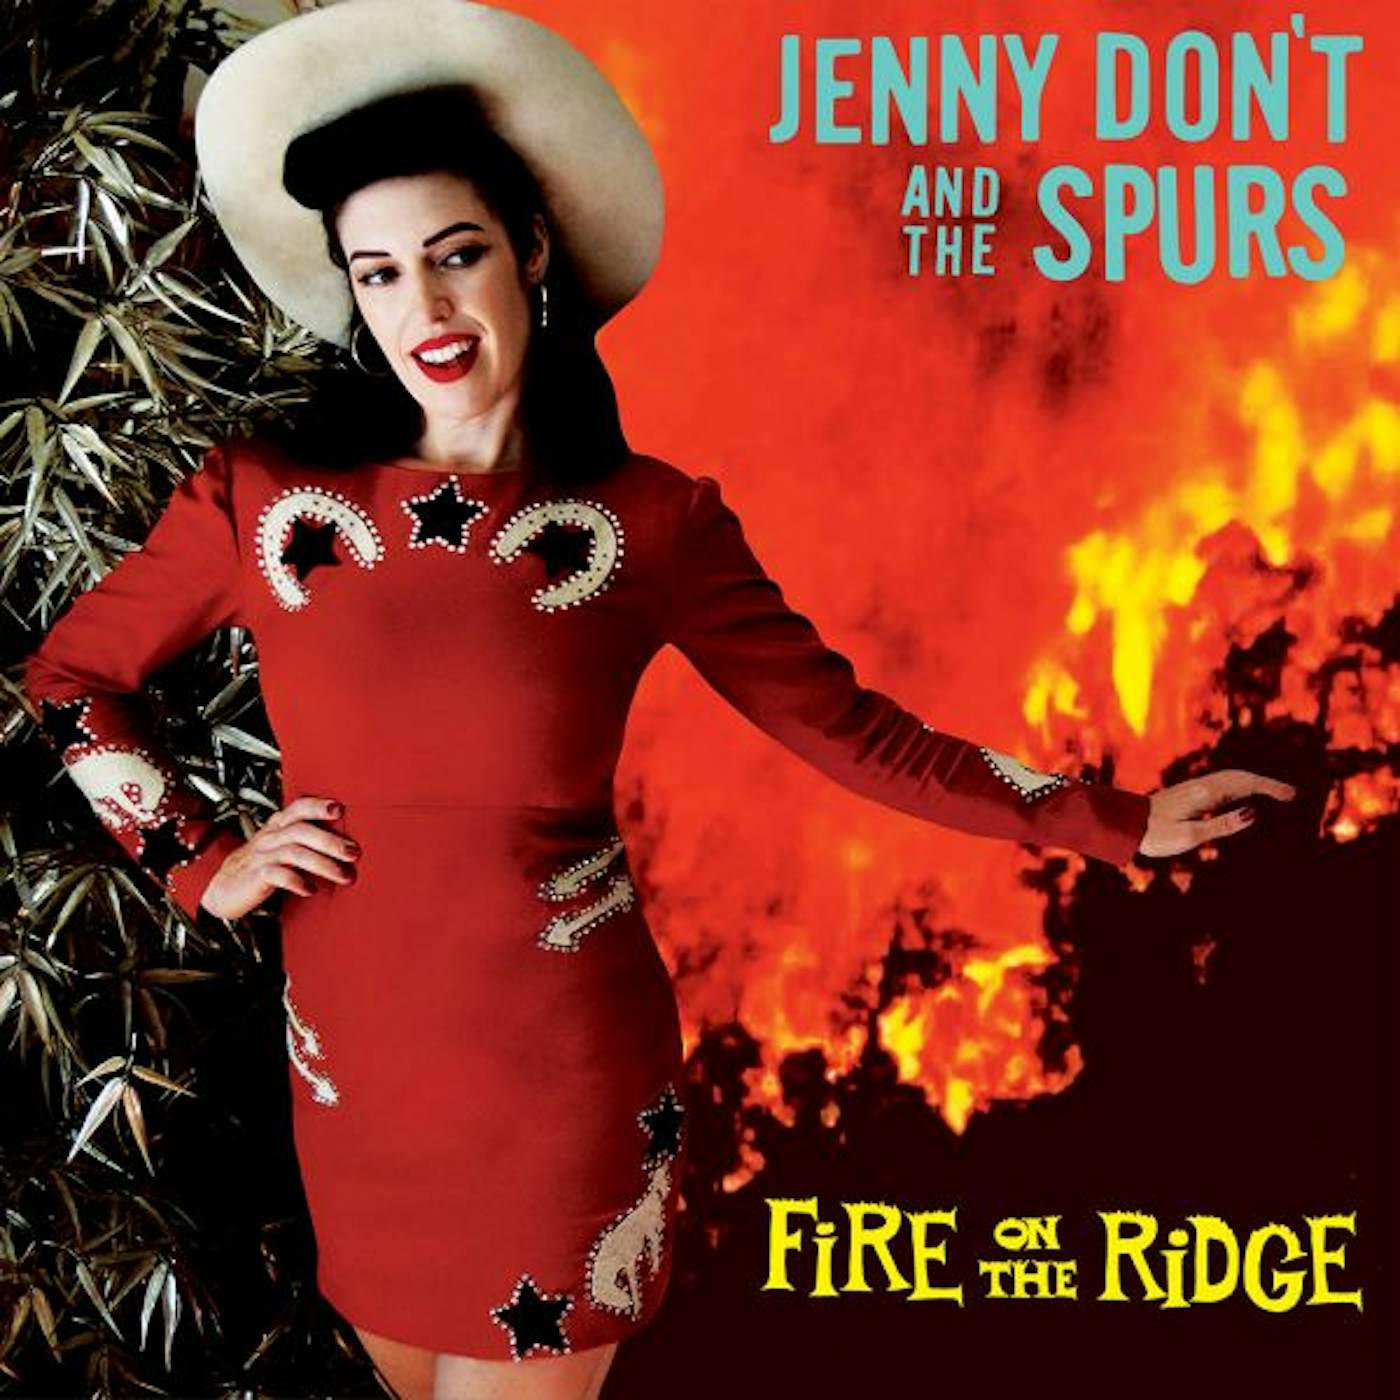 Jenny Don't And The Spurs Fire on the Ridge Vinyl Record